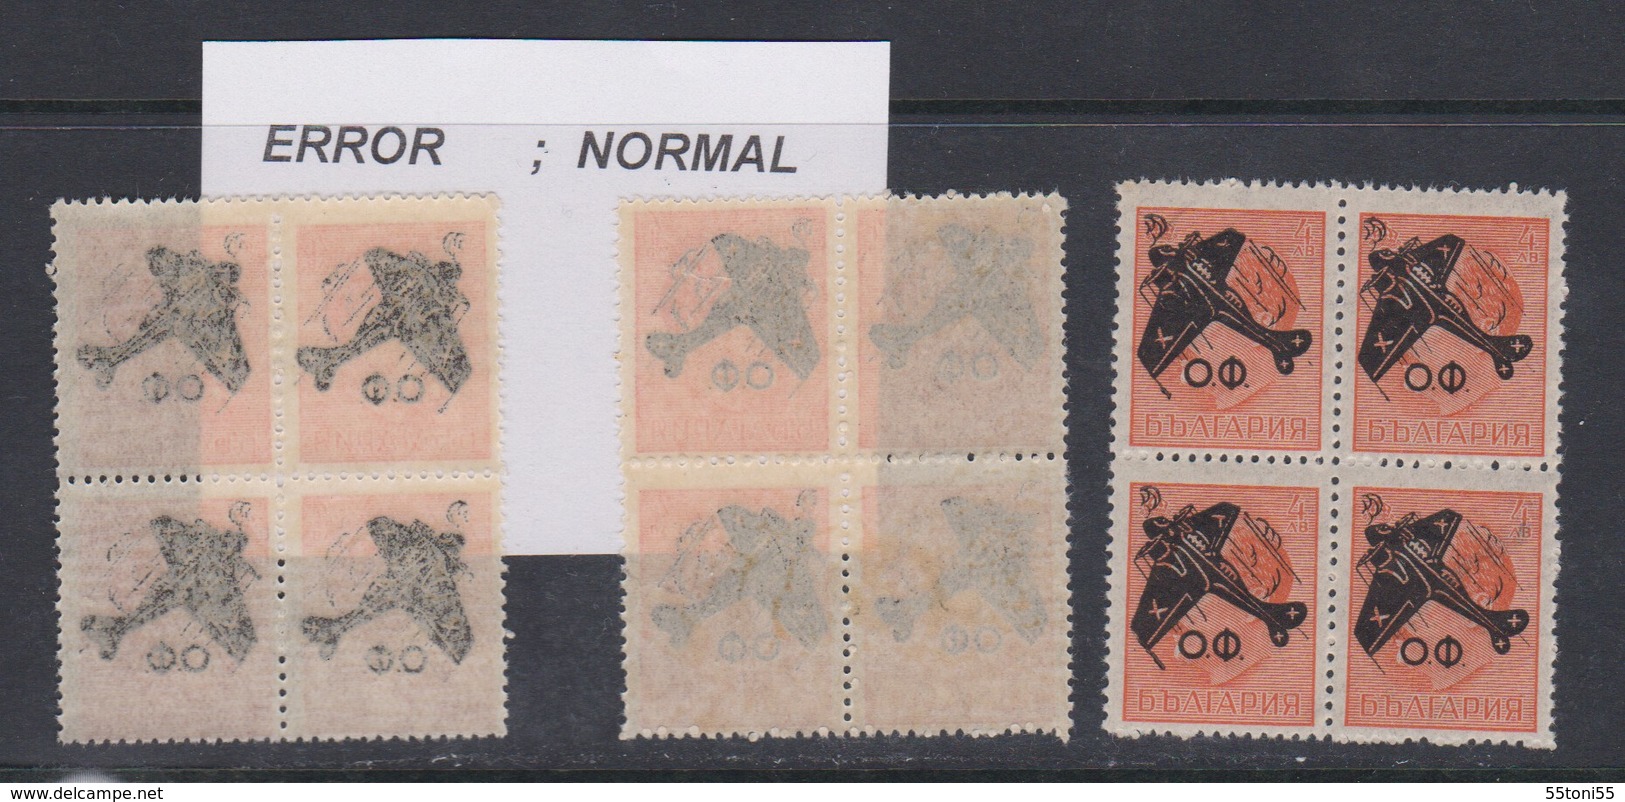 1946 Air Mail – Regular (ERROR -  Airplane And The Other Side ) Block Of Four – MNH  Bulgaria/Bulgarie - Errors, Freaks & Oddities (EFO)